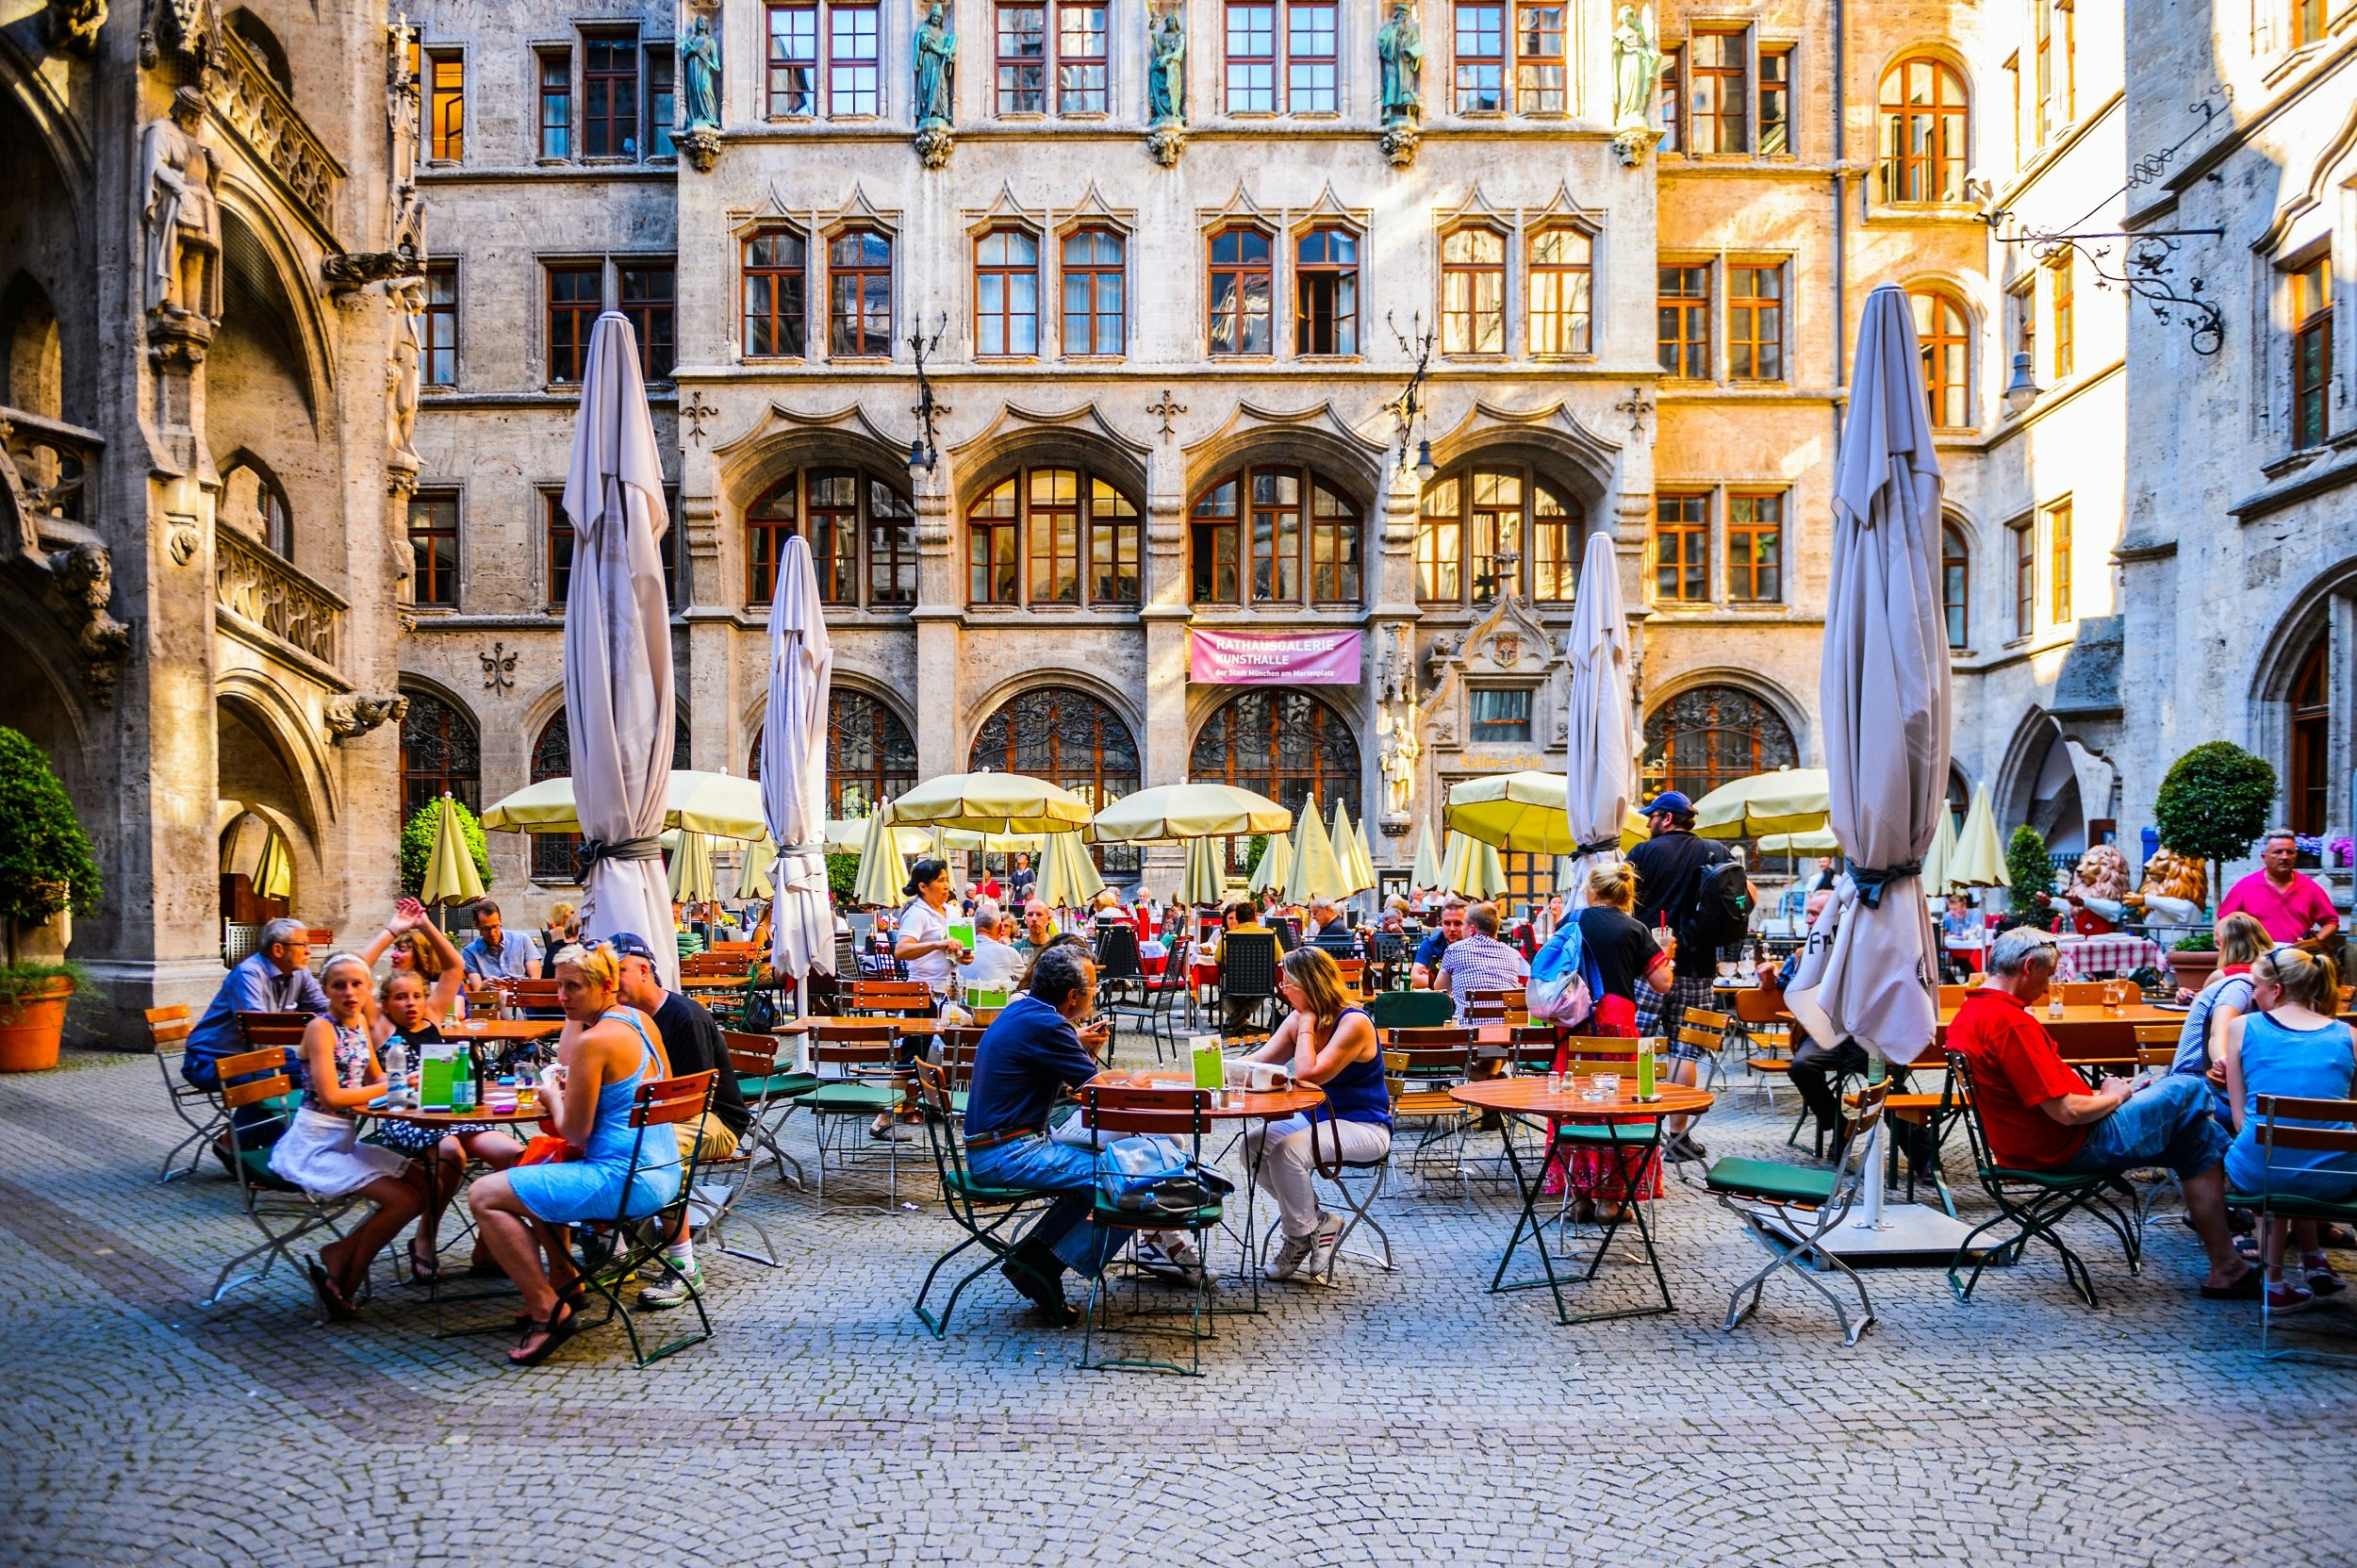 An open-air cobbled square, surrounded on three sides by tall stone buildings, is full of people sat at tables with umbrellas.